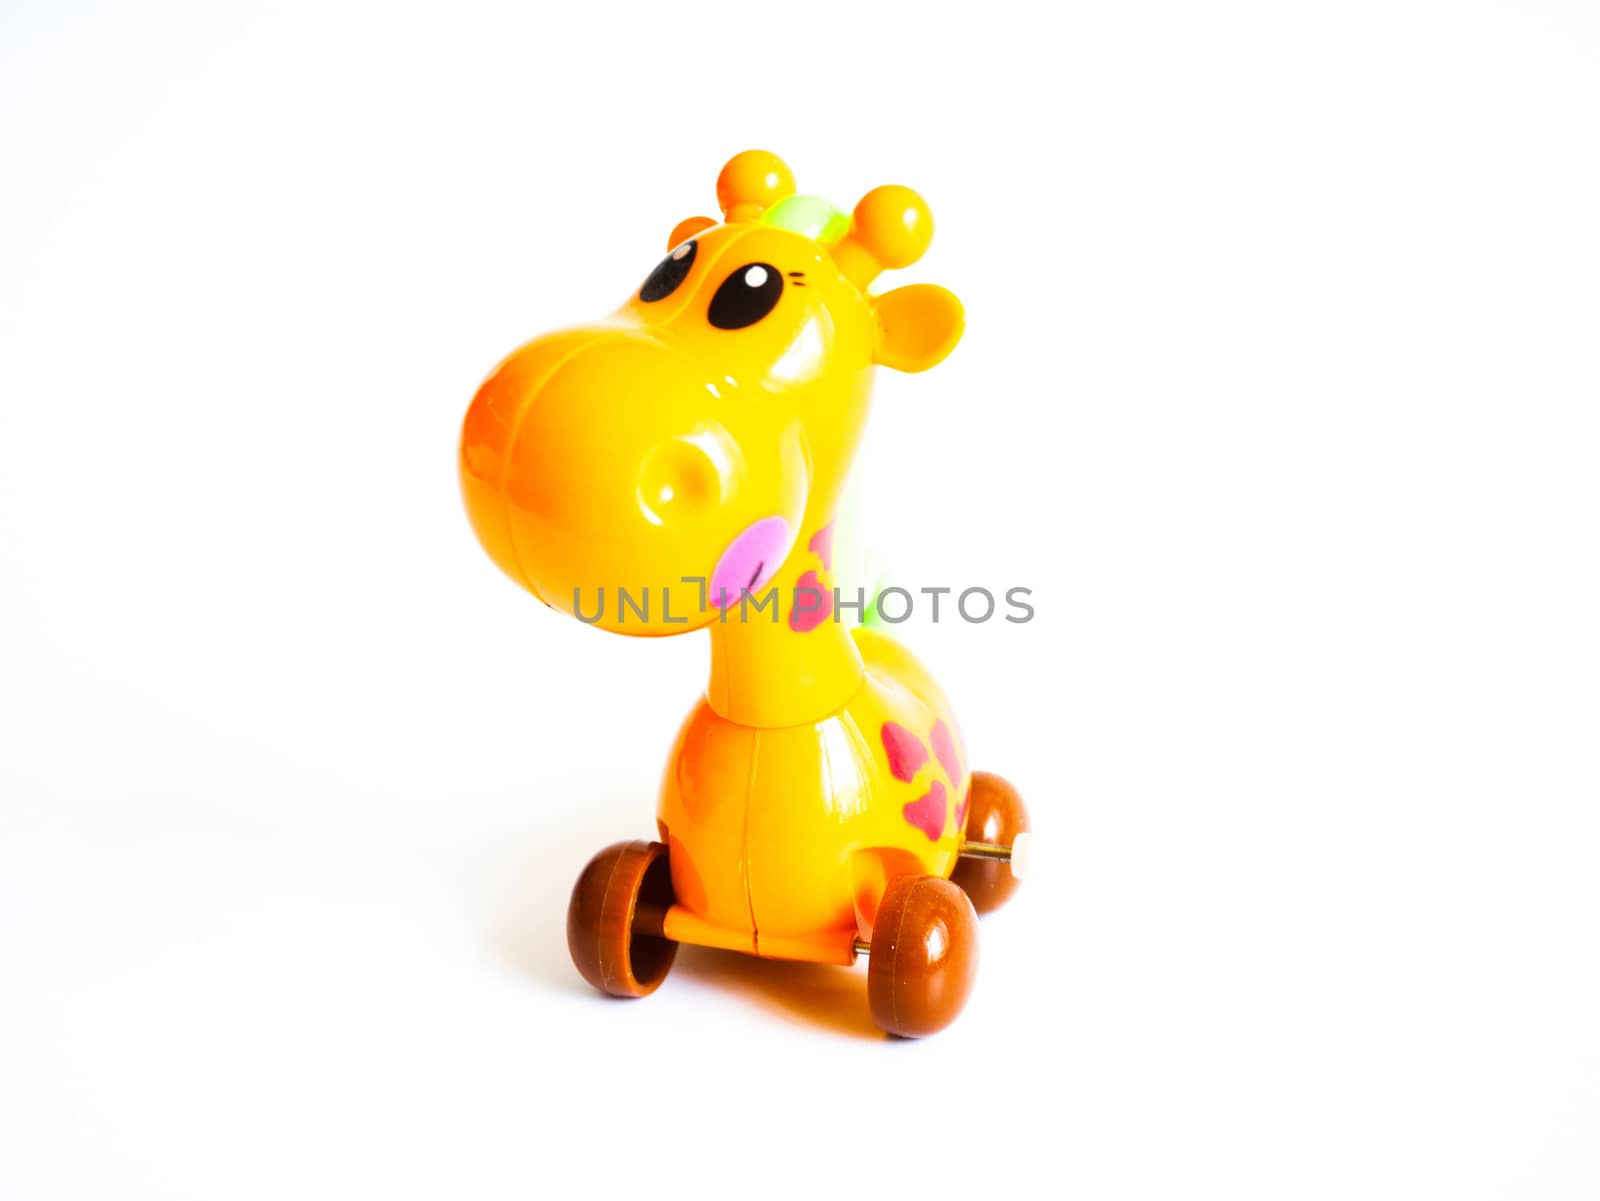 Close up giraffe toy on isolated white background